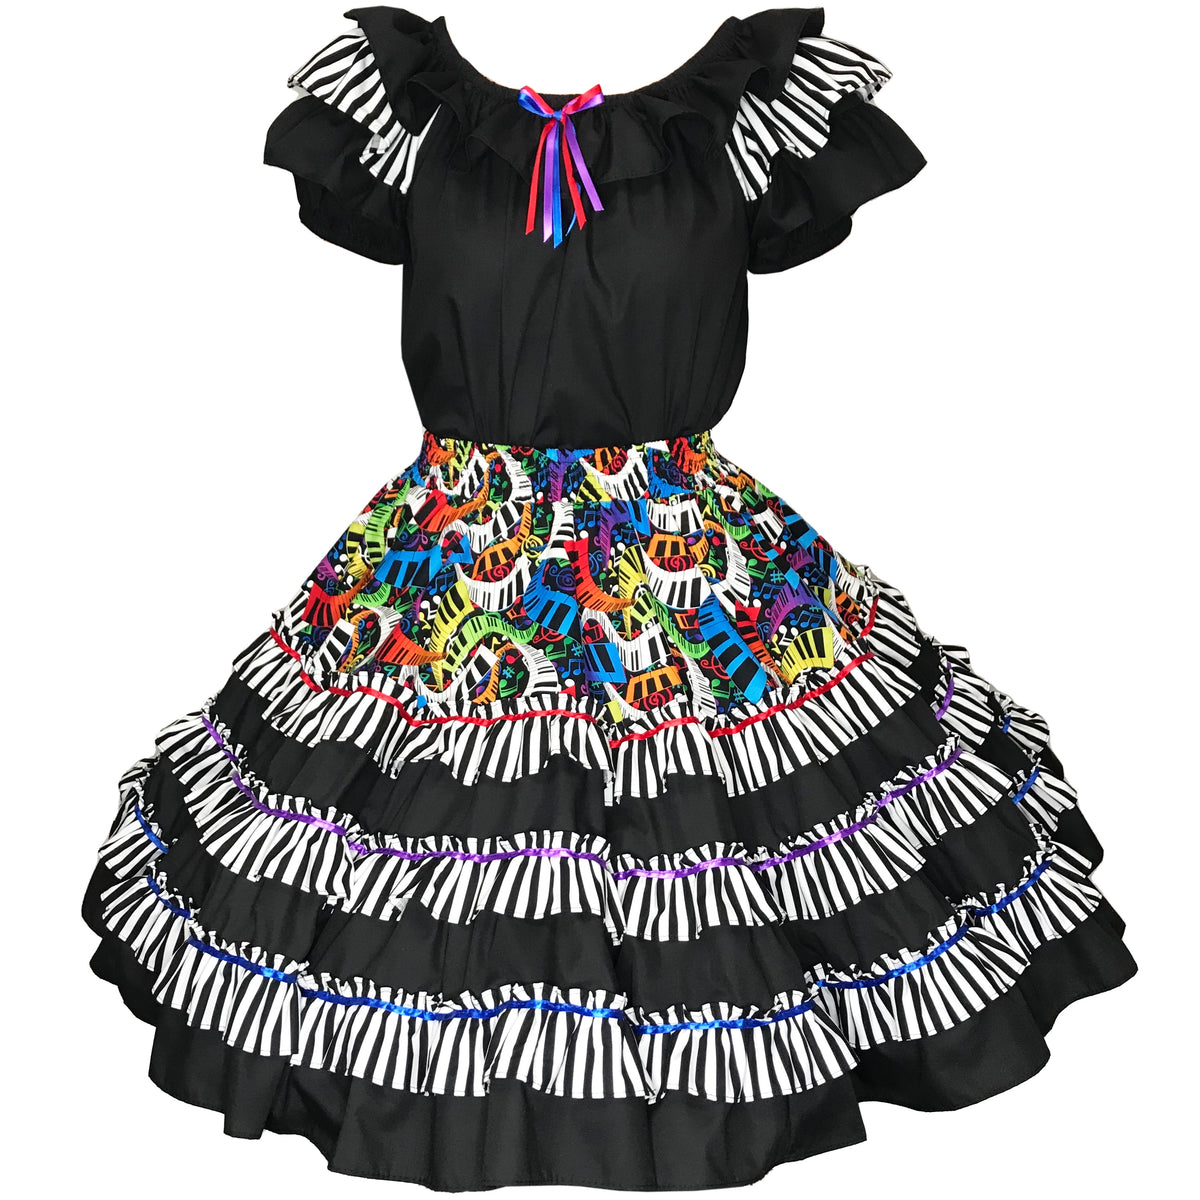 Limited quantities of a women&#39;s Musical Multi-color Square Dance Outfit with colorful ruffles and a piano keys stripe print, by Square Up Fashions.